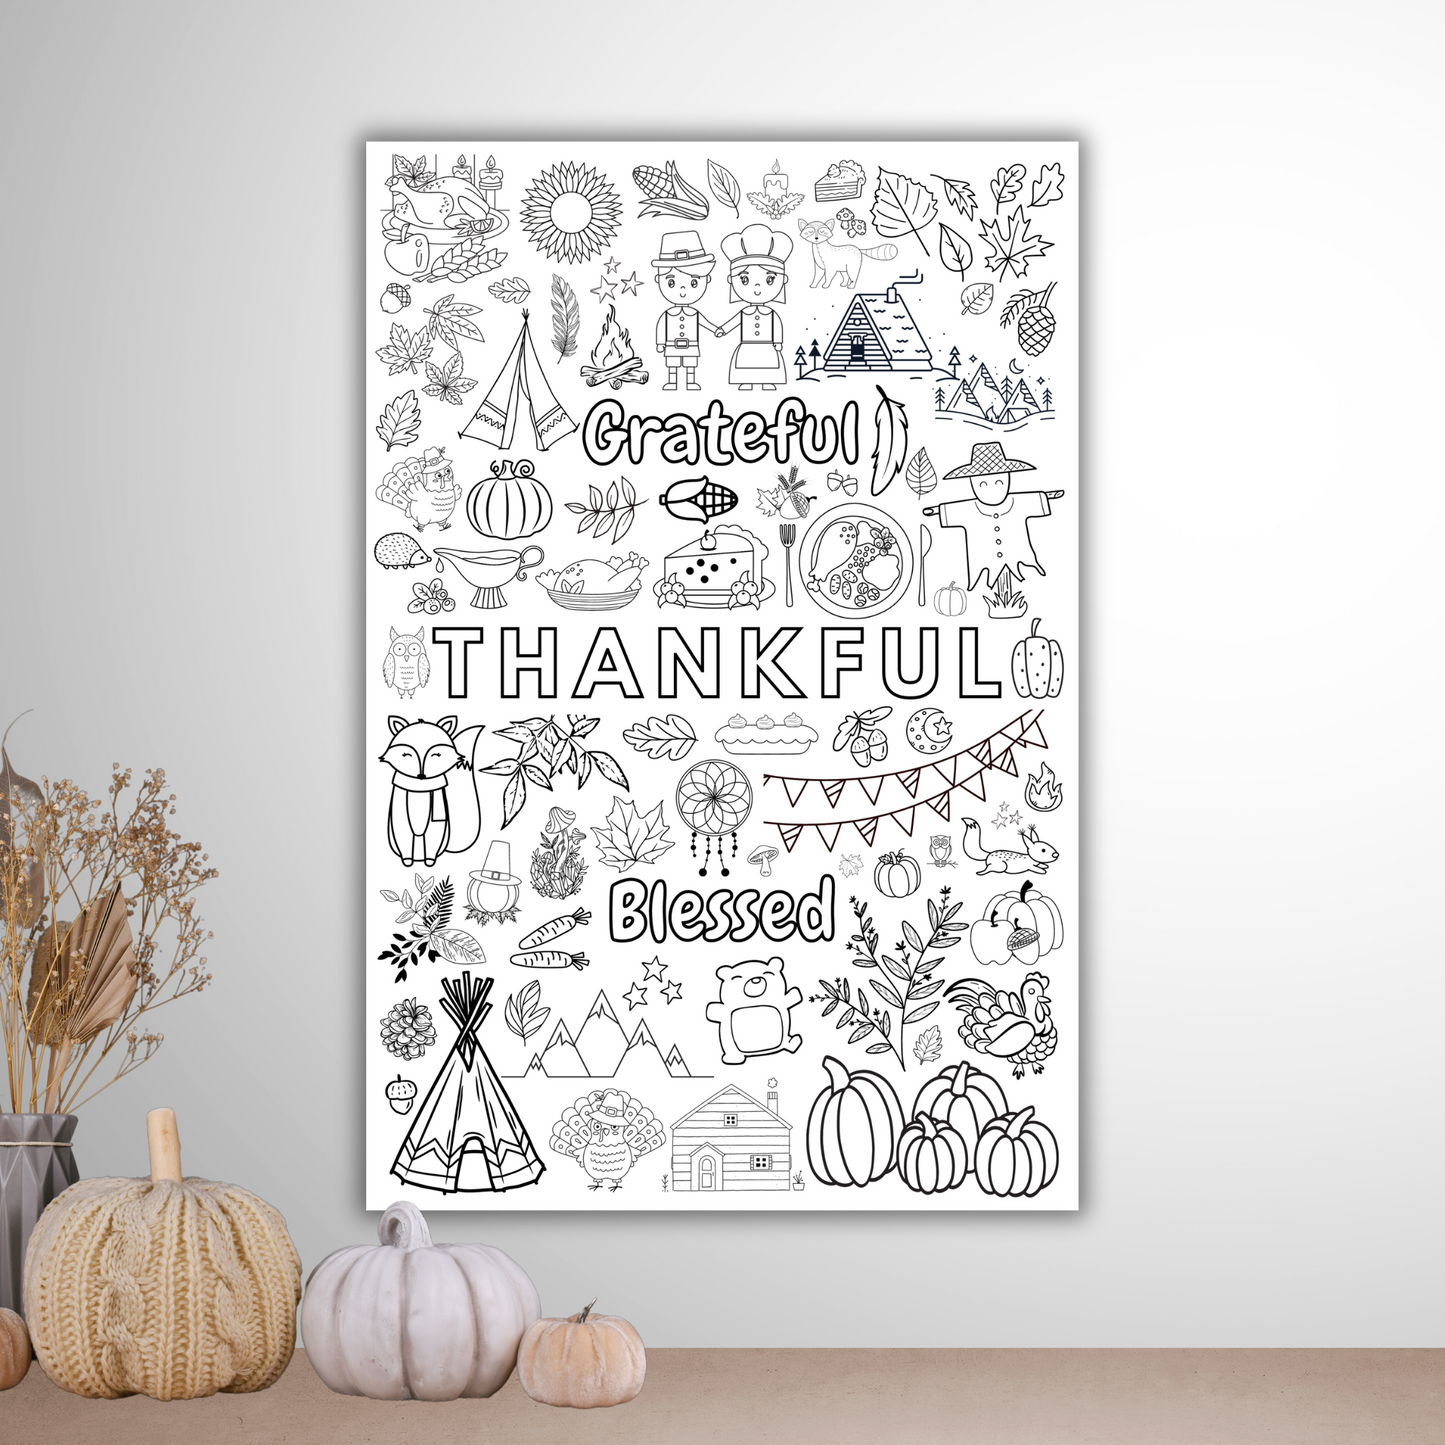 Grateful, Thankful, Blessed | Big Coloring Poster